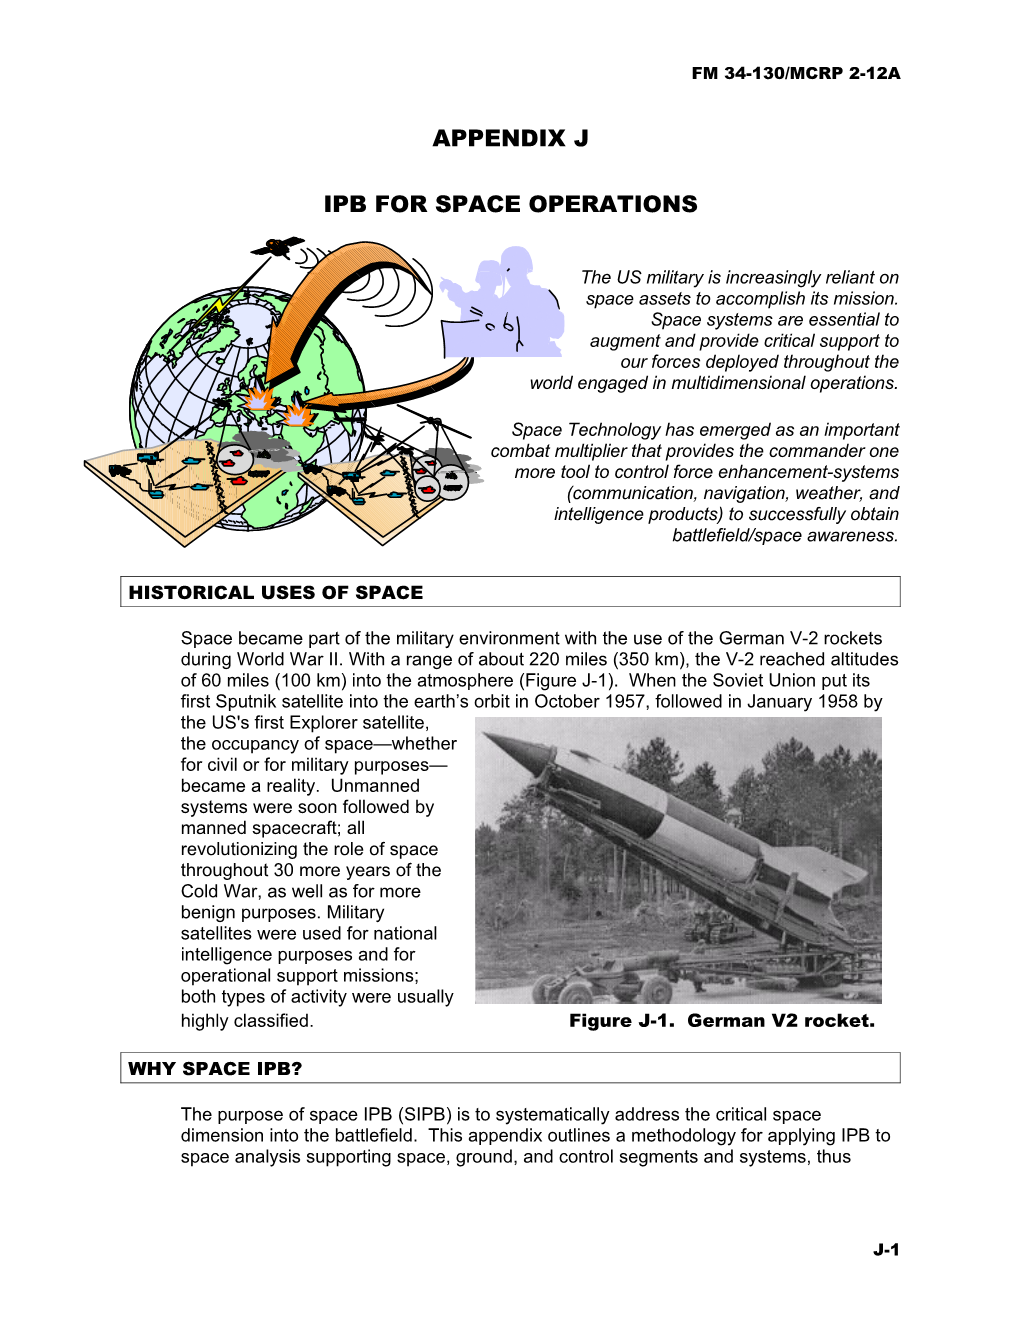 Ipb for Space Operations